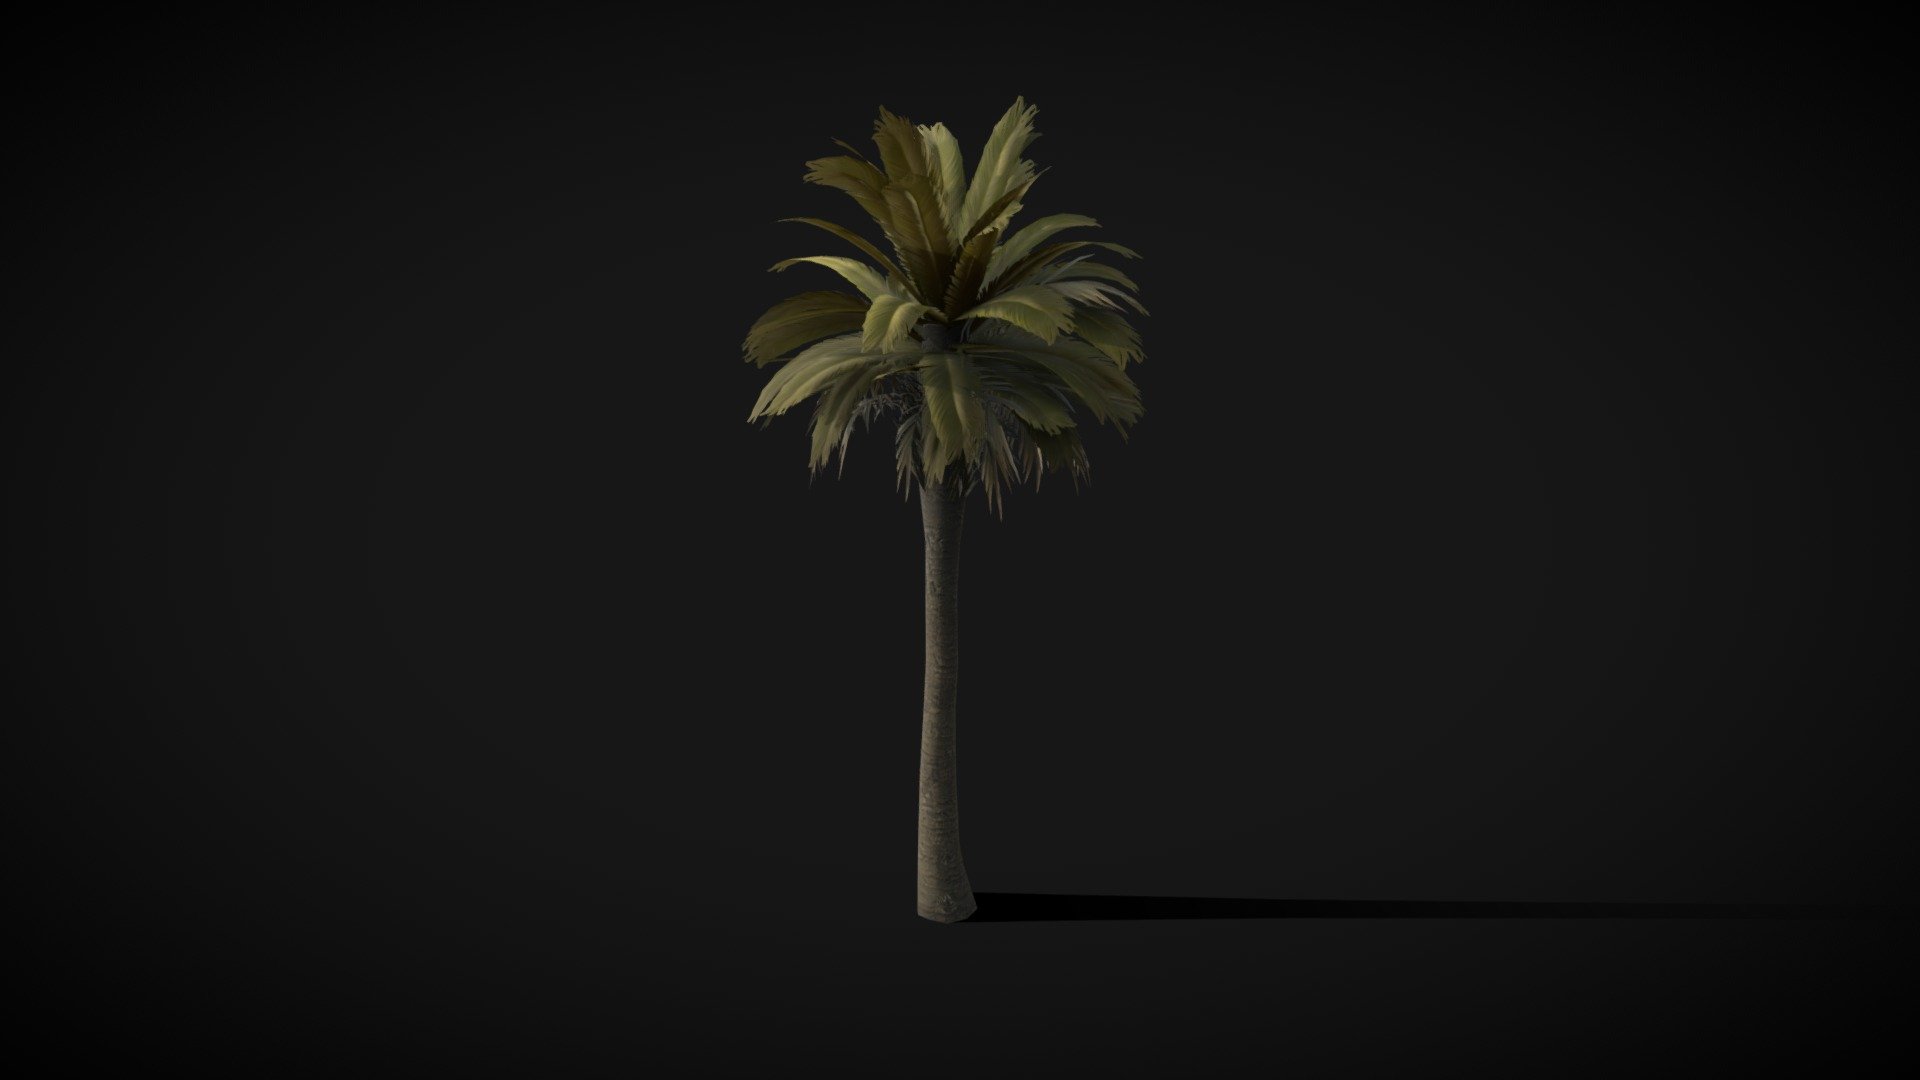 A Low poly palm tree. Perfect for populating your scenes with foliage. The palm Fronds are scanned from real plants. Plant a tree in your digital scene today and Enjoy! - Palm Tree 3D model - SF City Props & vegetation - Buy Royalty Free 3D model by artbytav 3d model